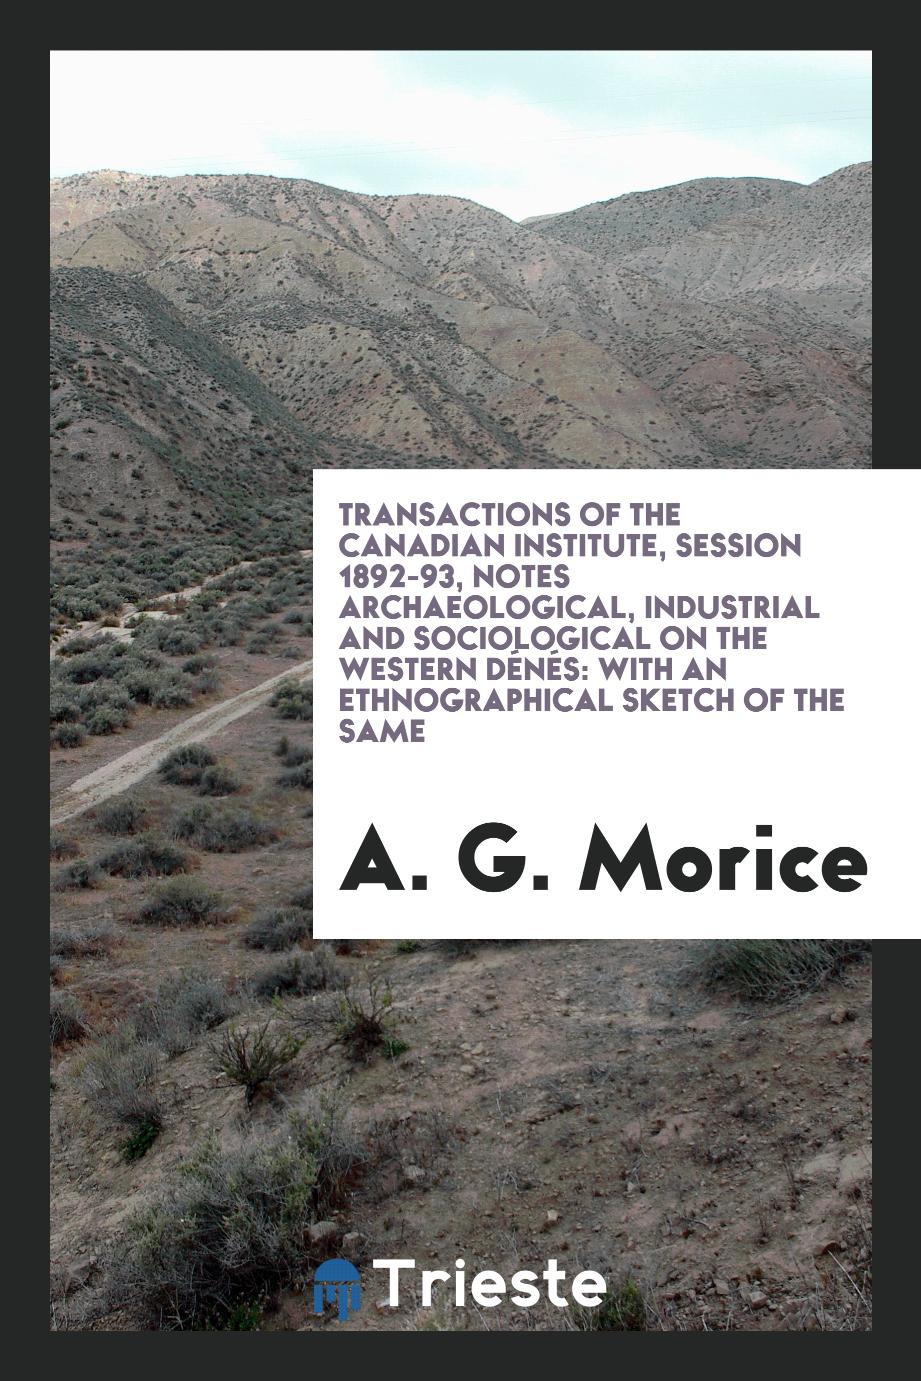 Transactions of the Canadian Institute, session 1892-93, Notes archaeological, industrial and sociological on the Western Dénés: with an ethnographical sketch of the same